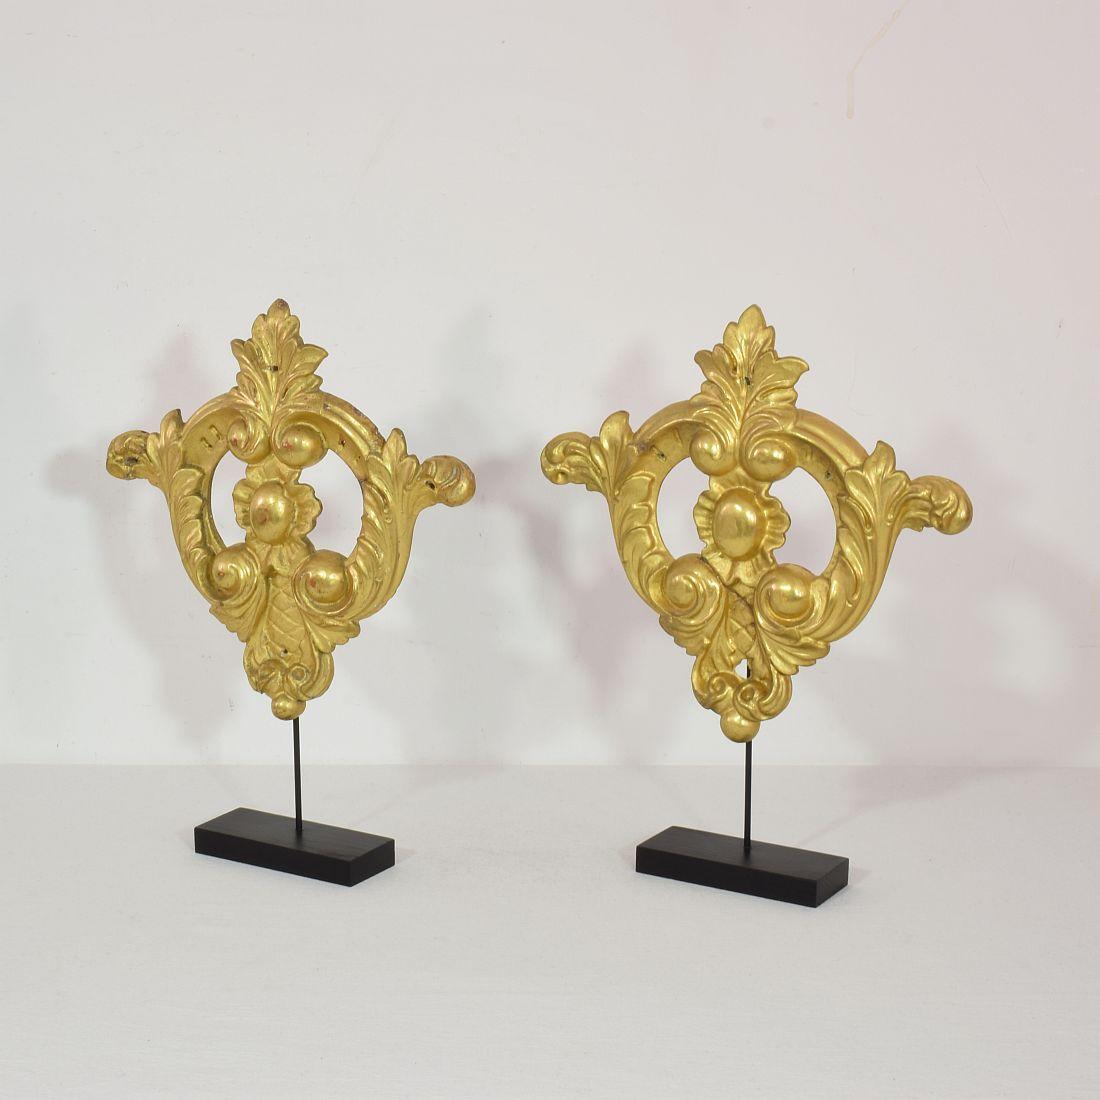 Nice couple of two gilt-wood ornaments in baroque style,
Italy, circa 1850. Weathered and old repairs. Measurement here below includes the wooden base.